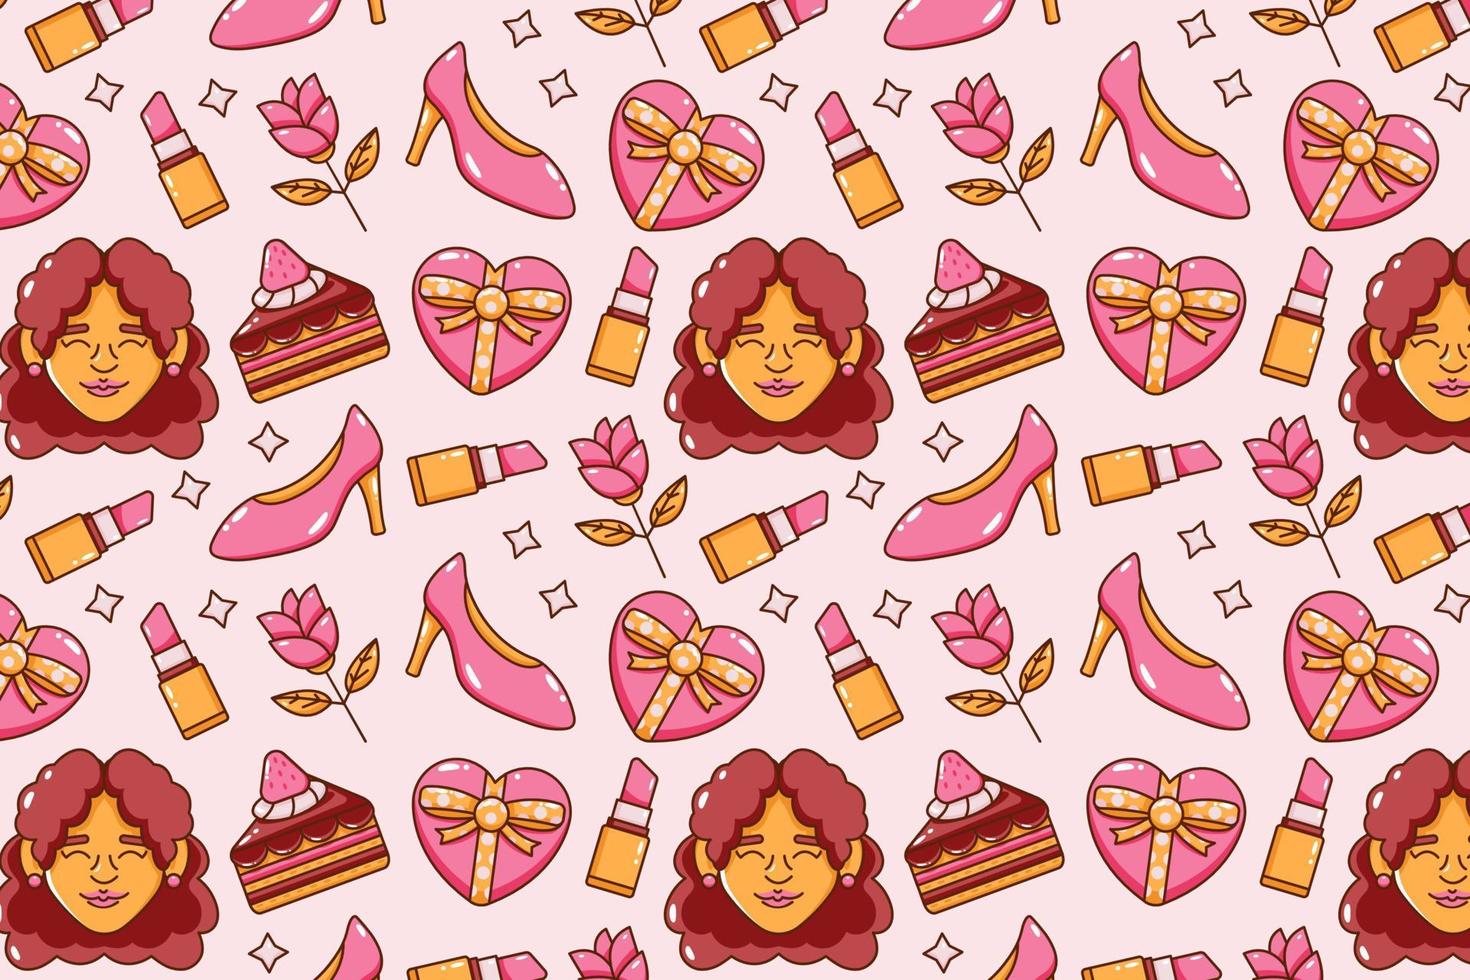 Women's day. Faces, cakes, drinks, lipsticks, high heels, gifts and flowers seamless pattern icons vector